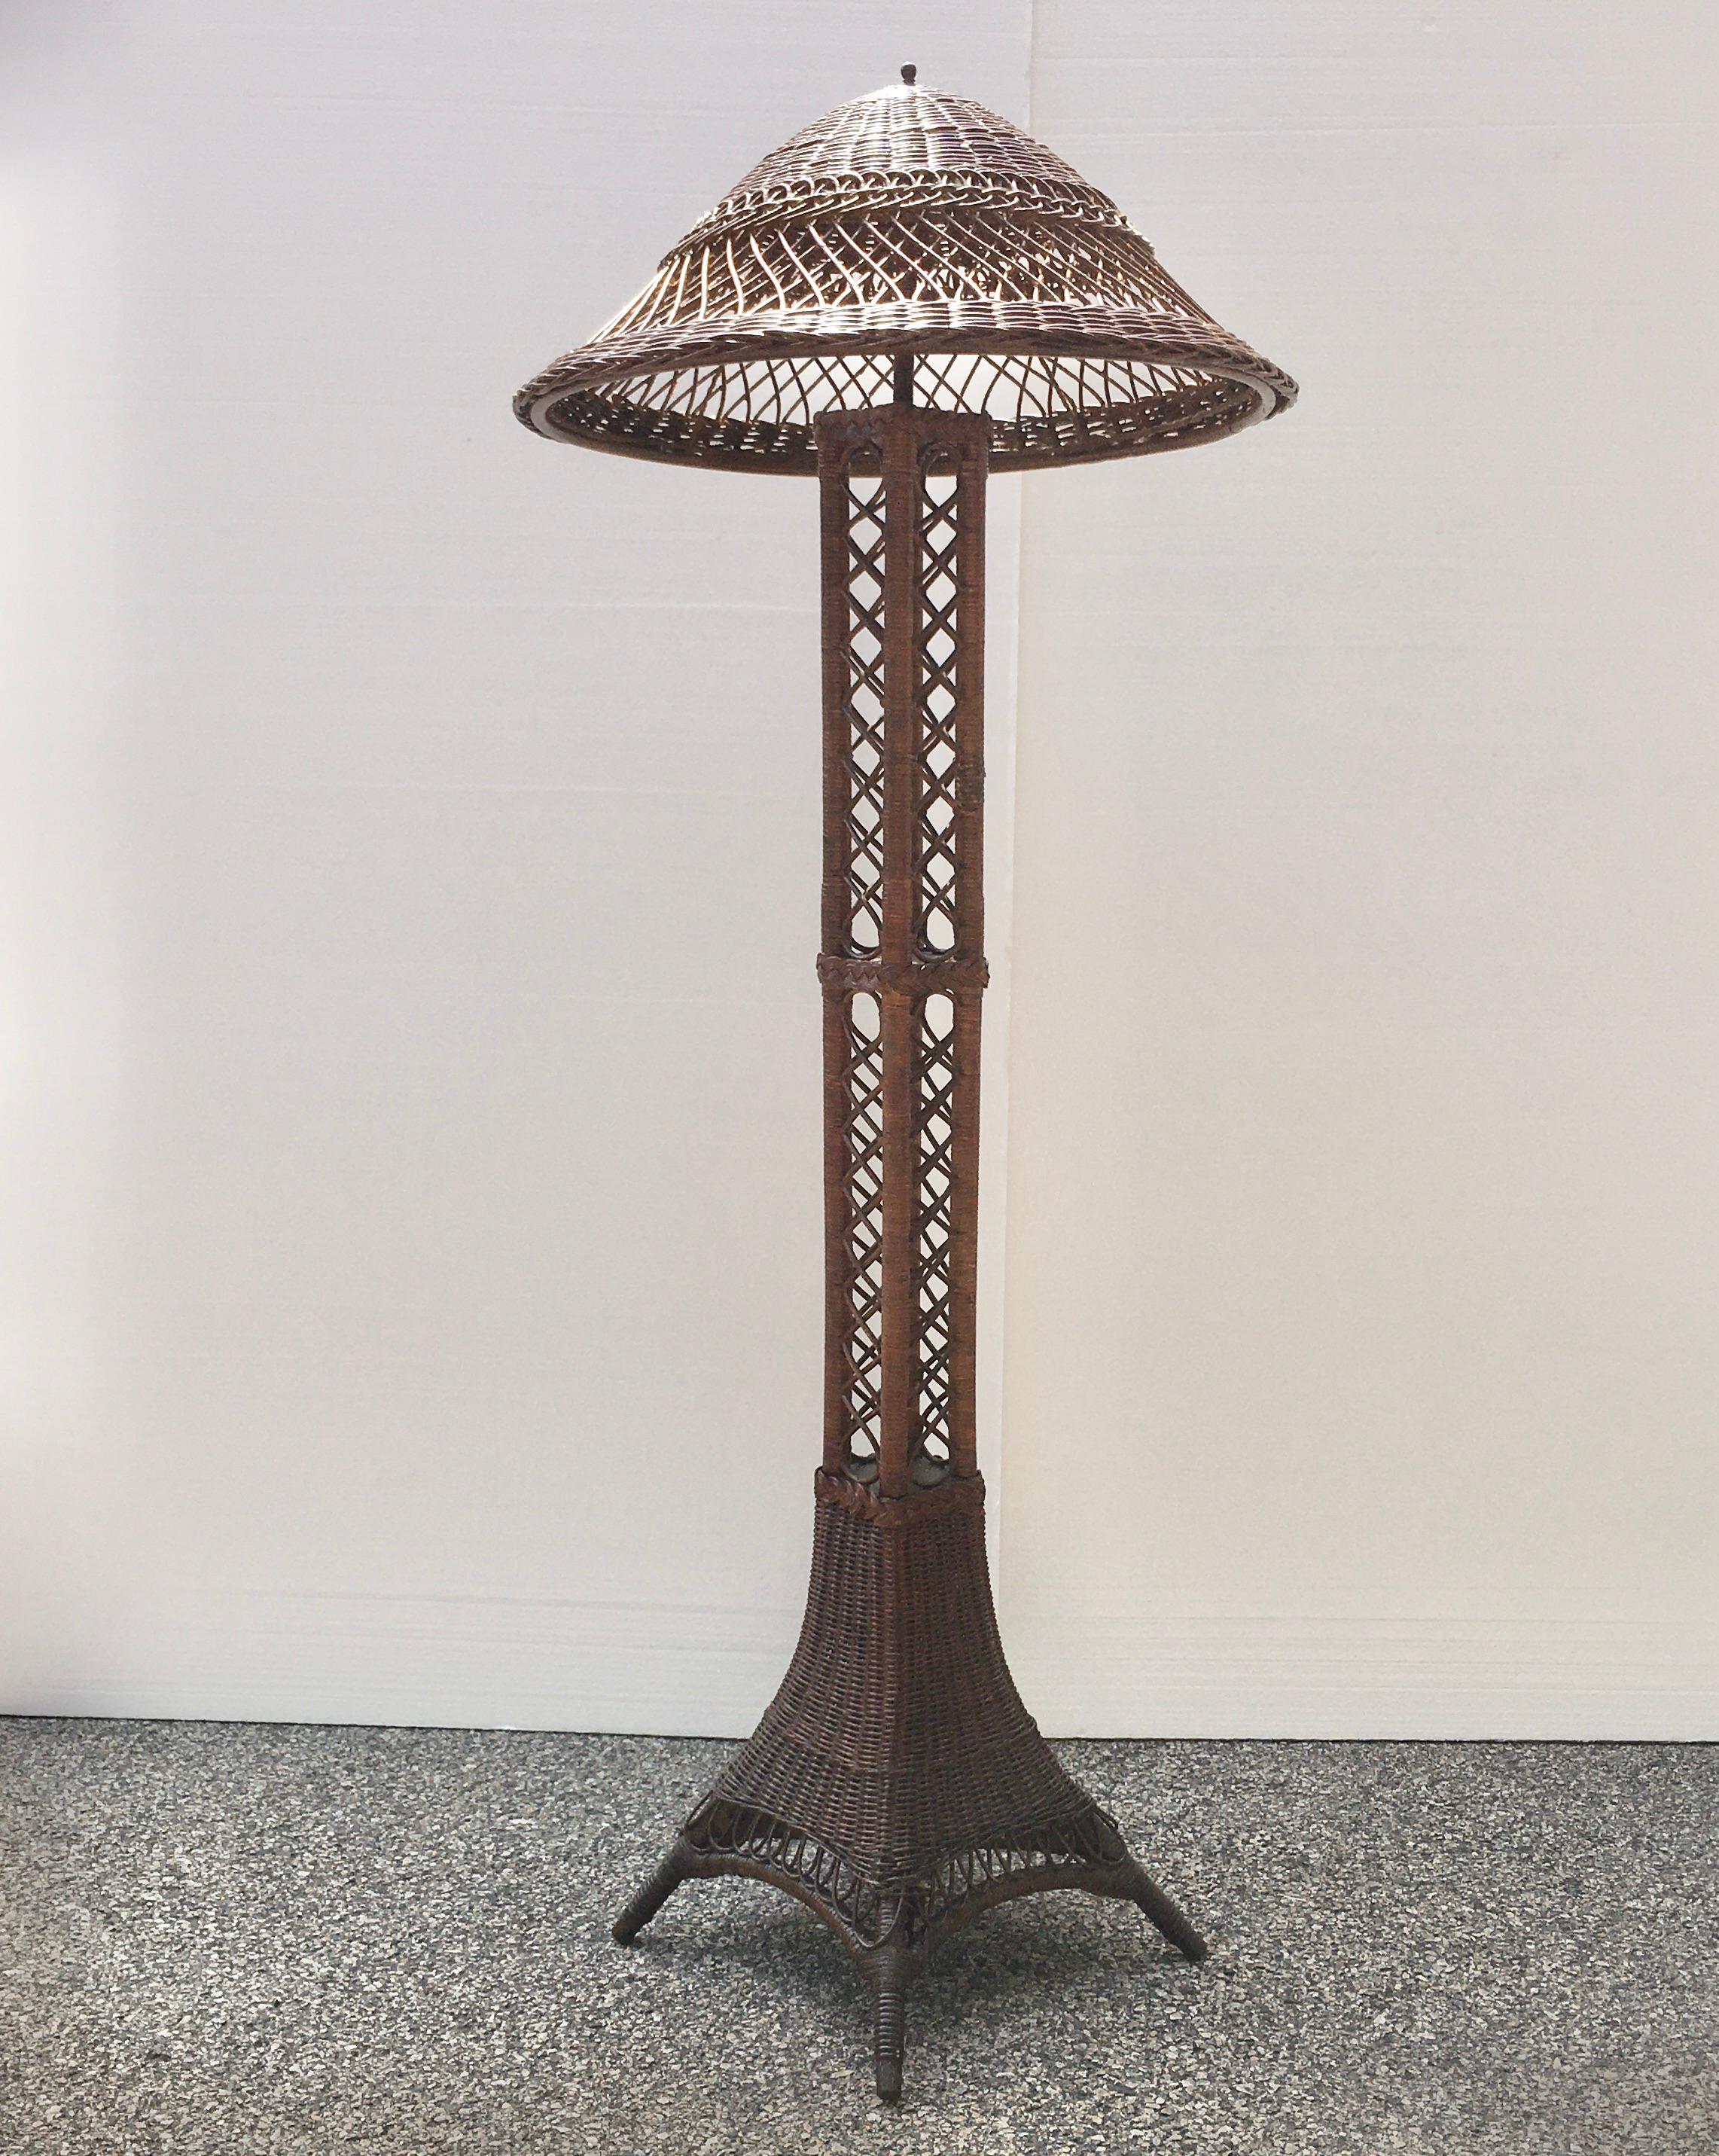 Antique wicker floor lamp in Eiffel Tower form embellished with beautiful braided banding, attributed to Heywood Wakefield.
Double brass sockets with pull chains, takes two standard size Edison screw light bulbs.
Measures: Overall height 69